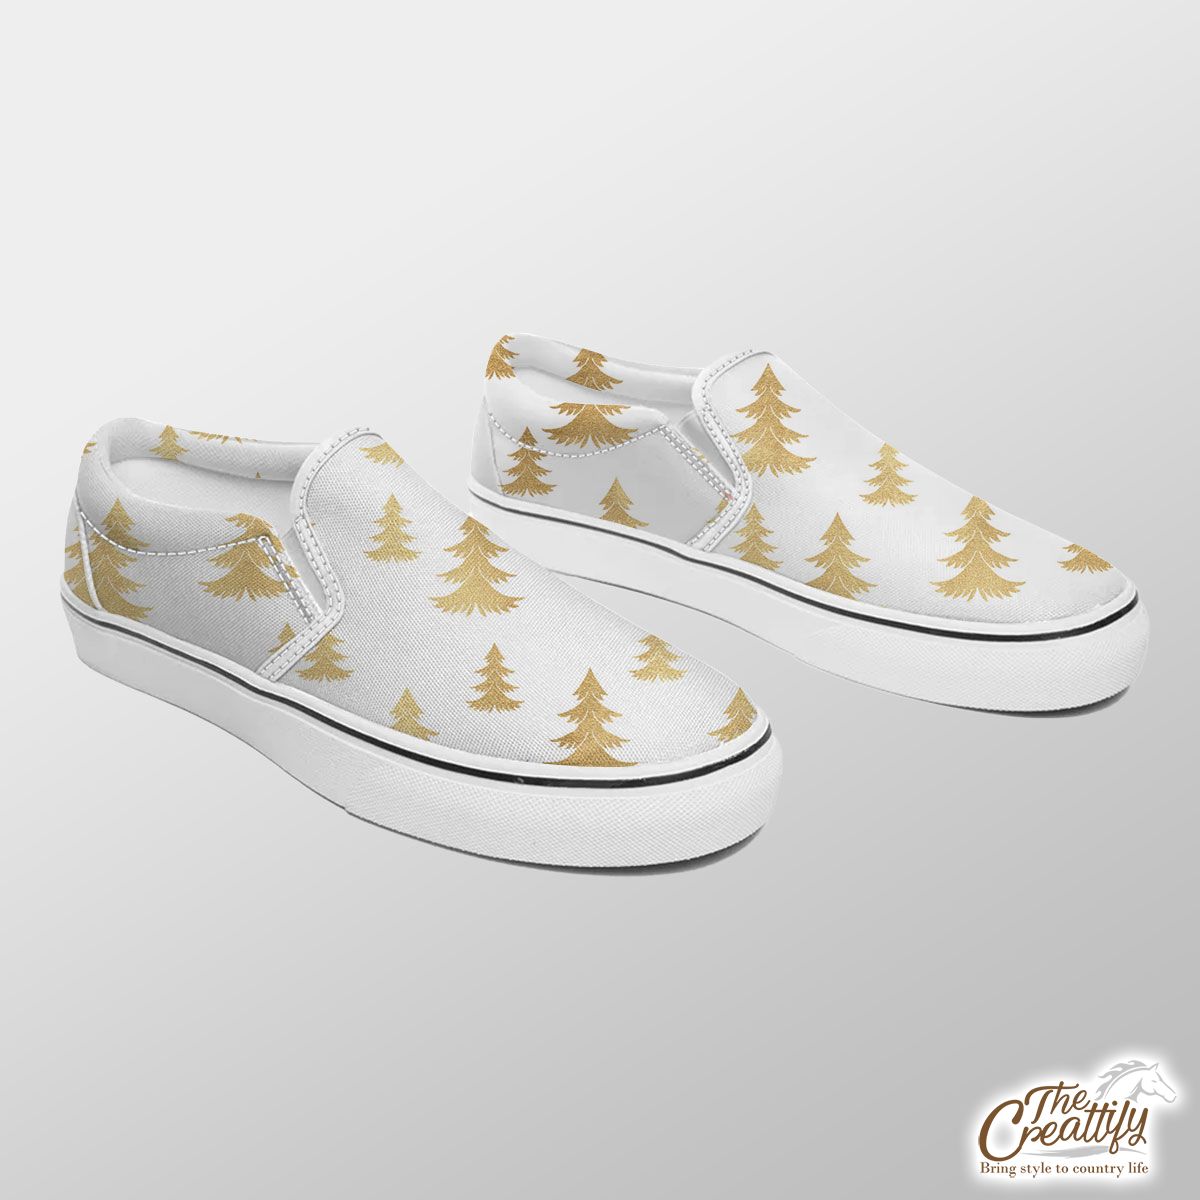 Gold Christmas Tree On White Background Slip On Sneakers